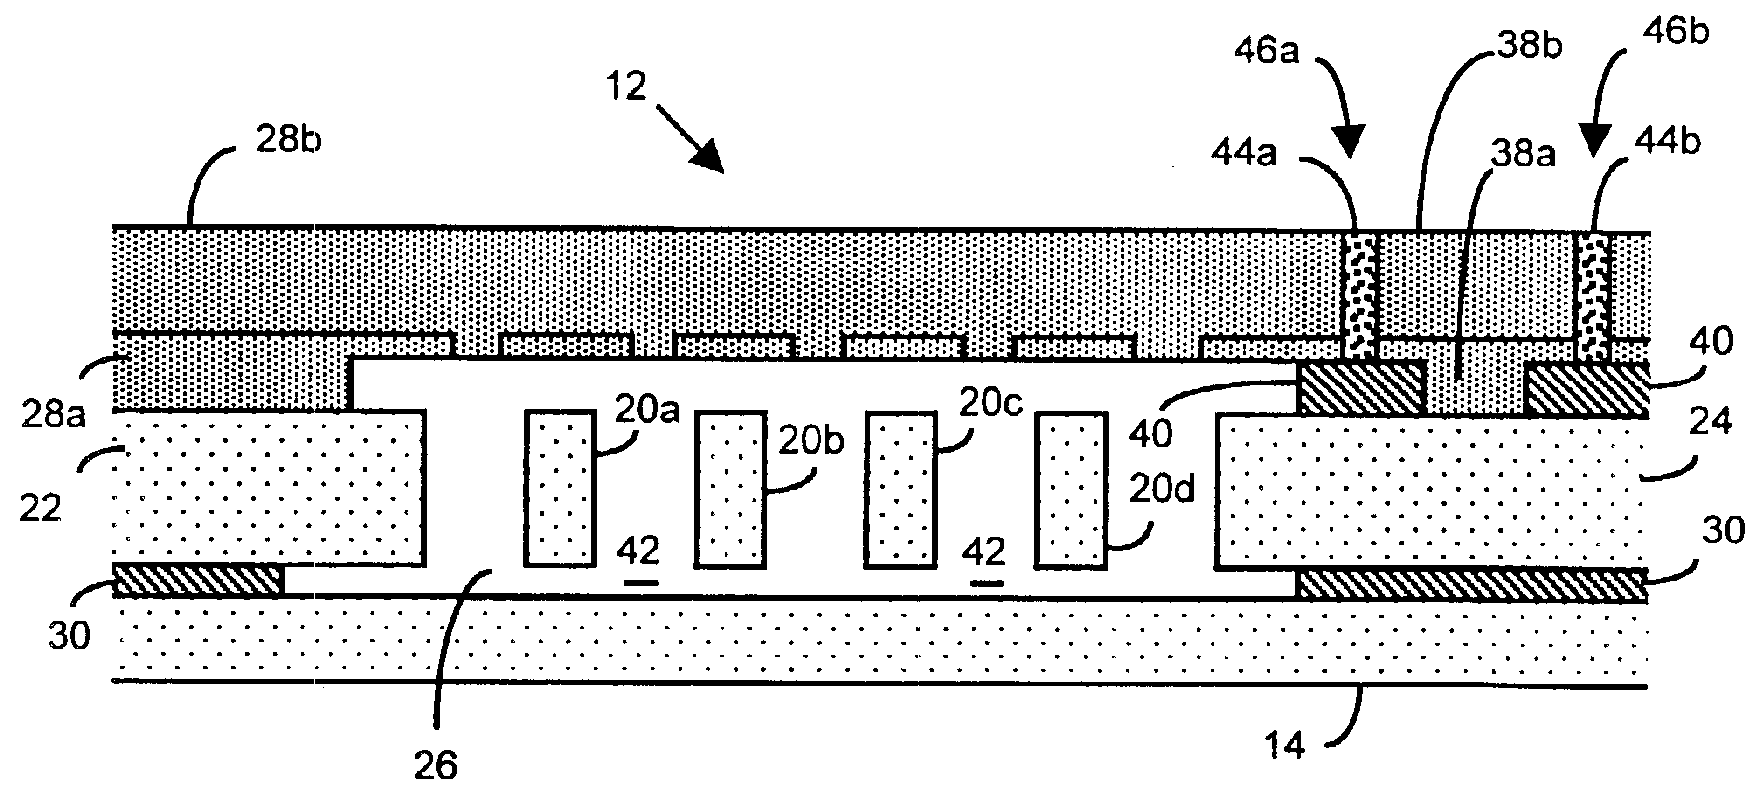 Method of fabricating microelectromechanical systems and devices having trench isolated contacts